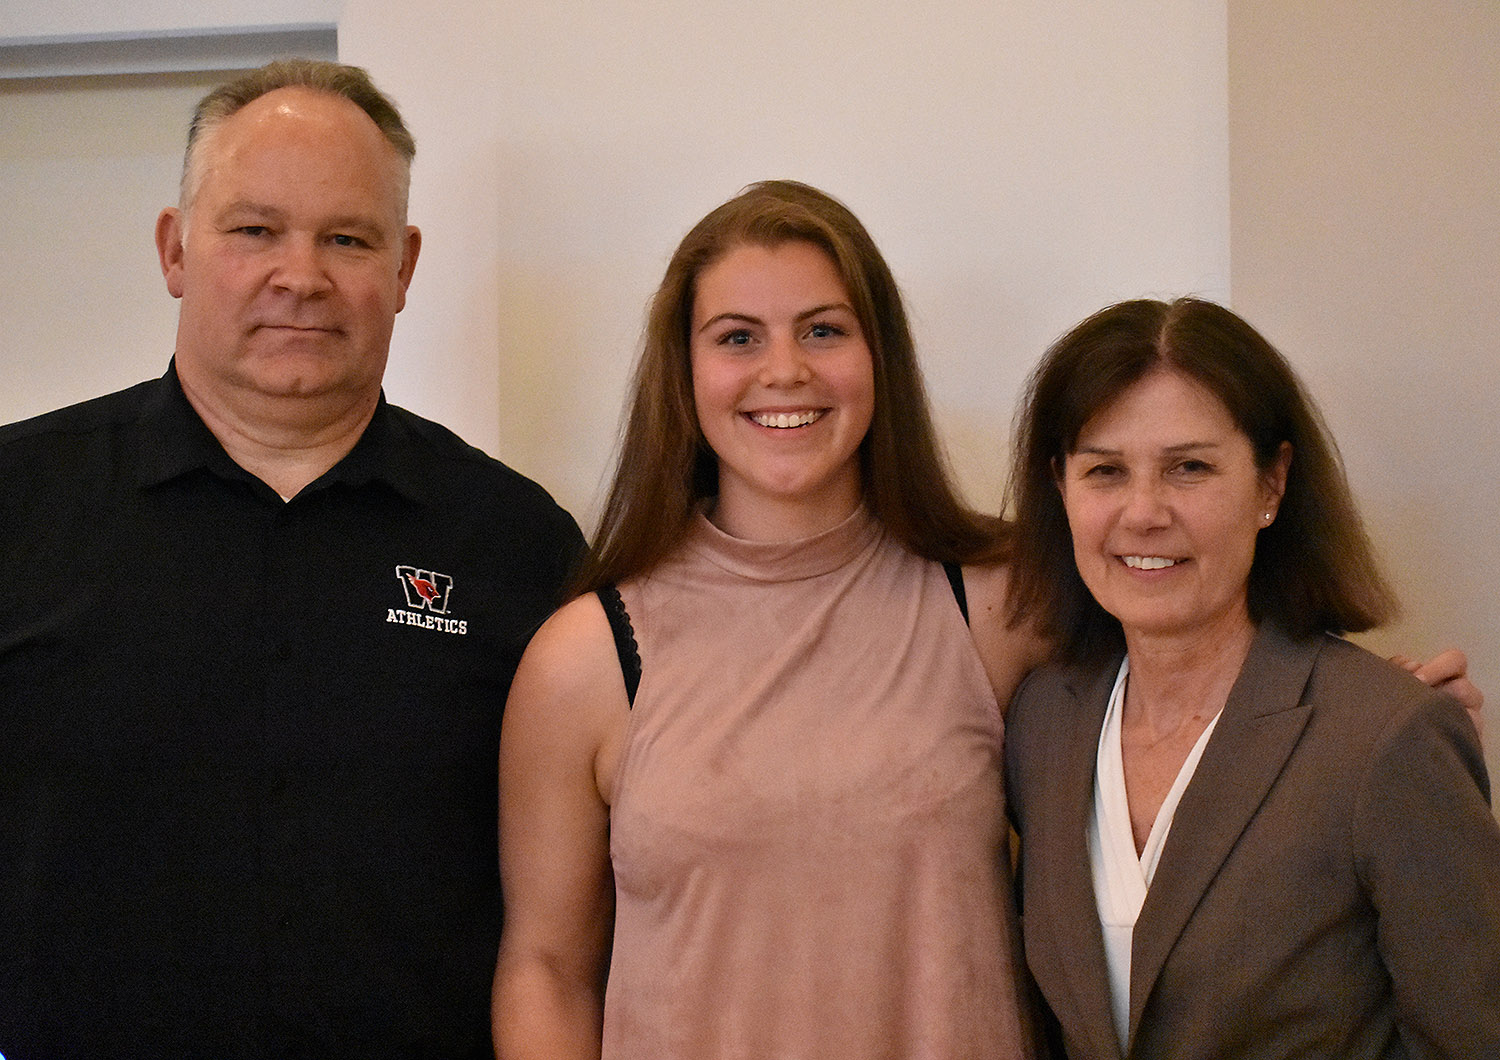 Basketball player Maddie Bledsoe '18 also received the Maynard Award. She is pictured with Whalen, left, and Kate Mullen, head women's basketball coach, right.